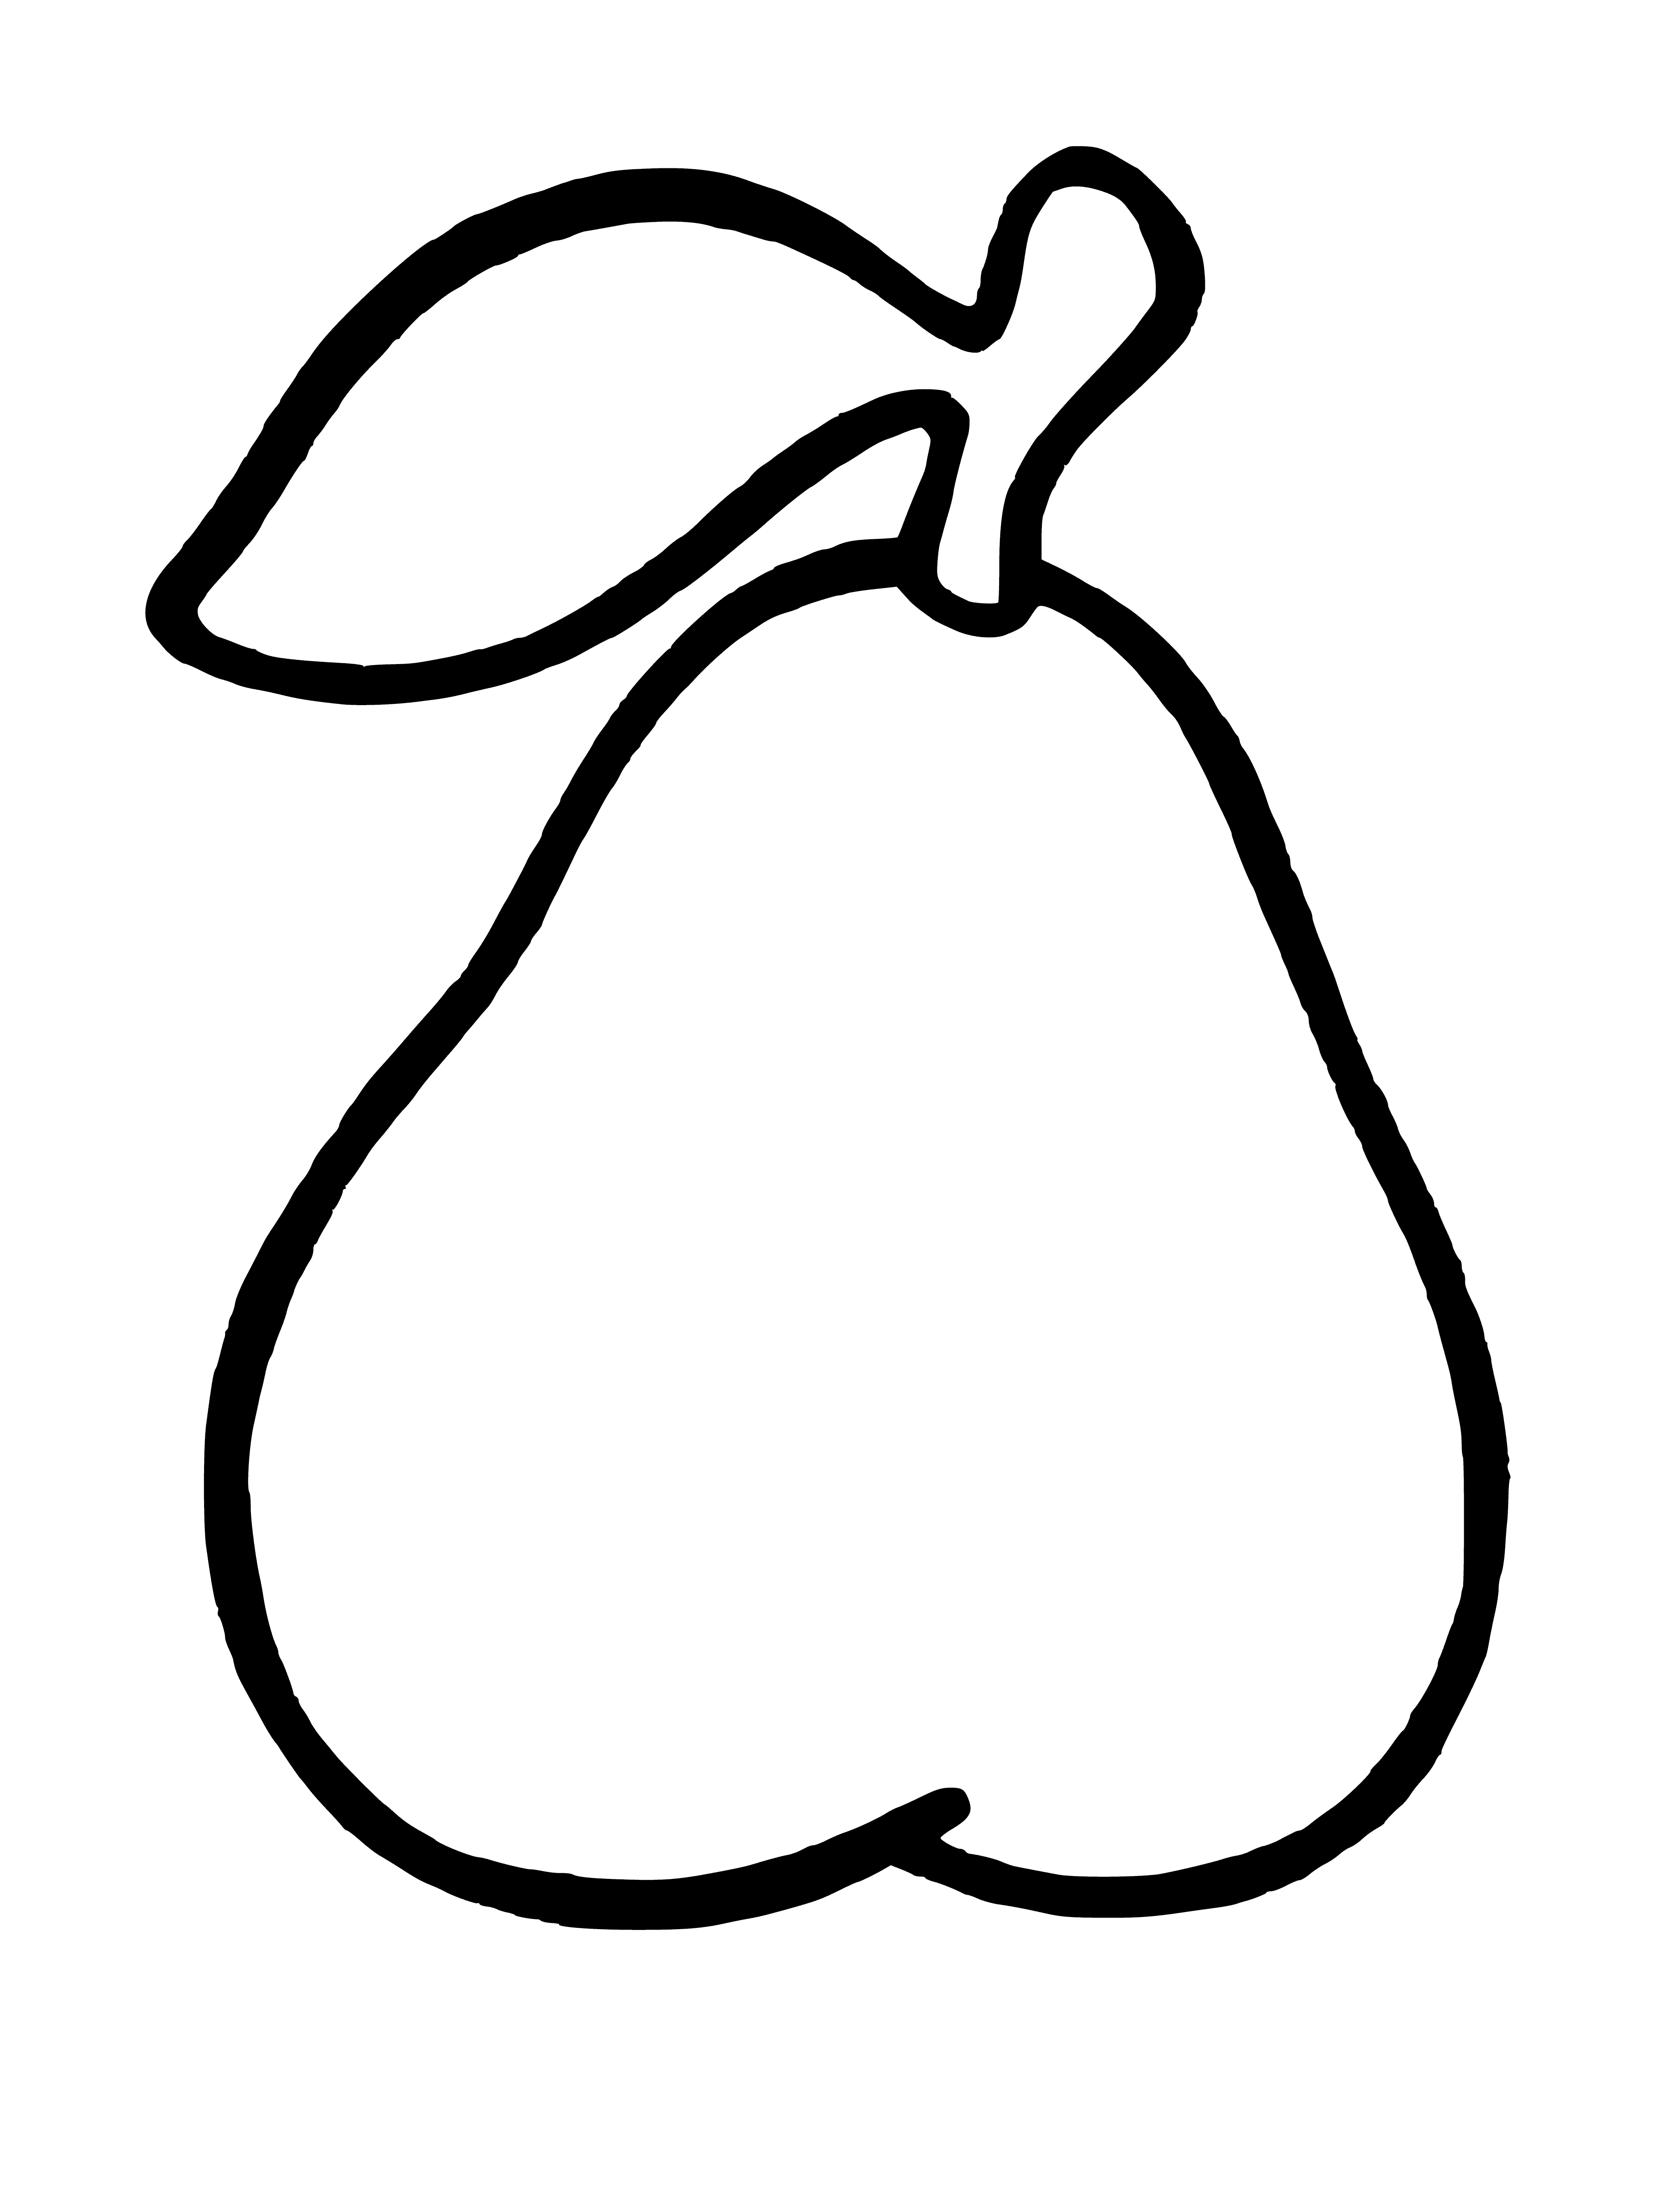 coloring page: Light brown pear cut in half revealing yellowish insides with black seeds on white background.